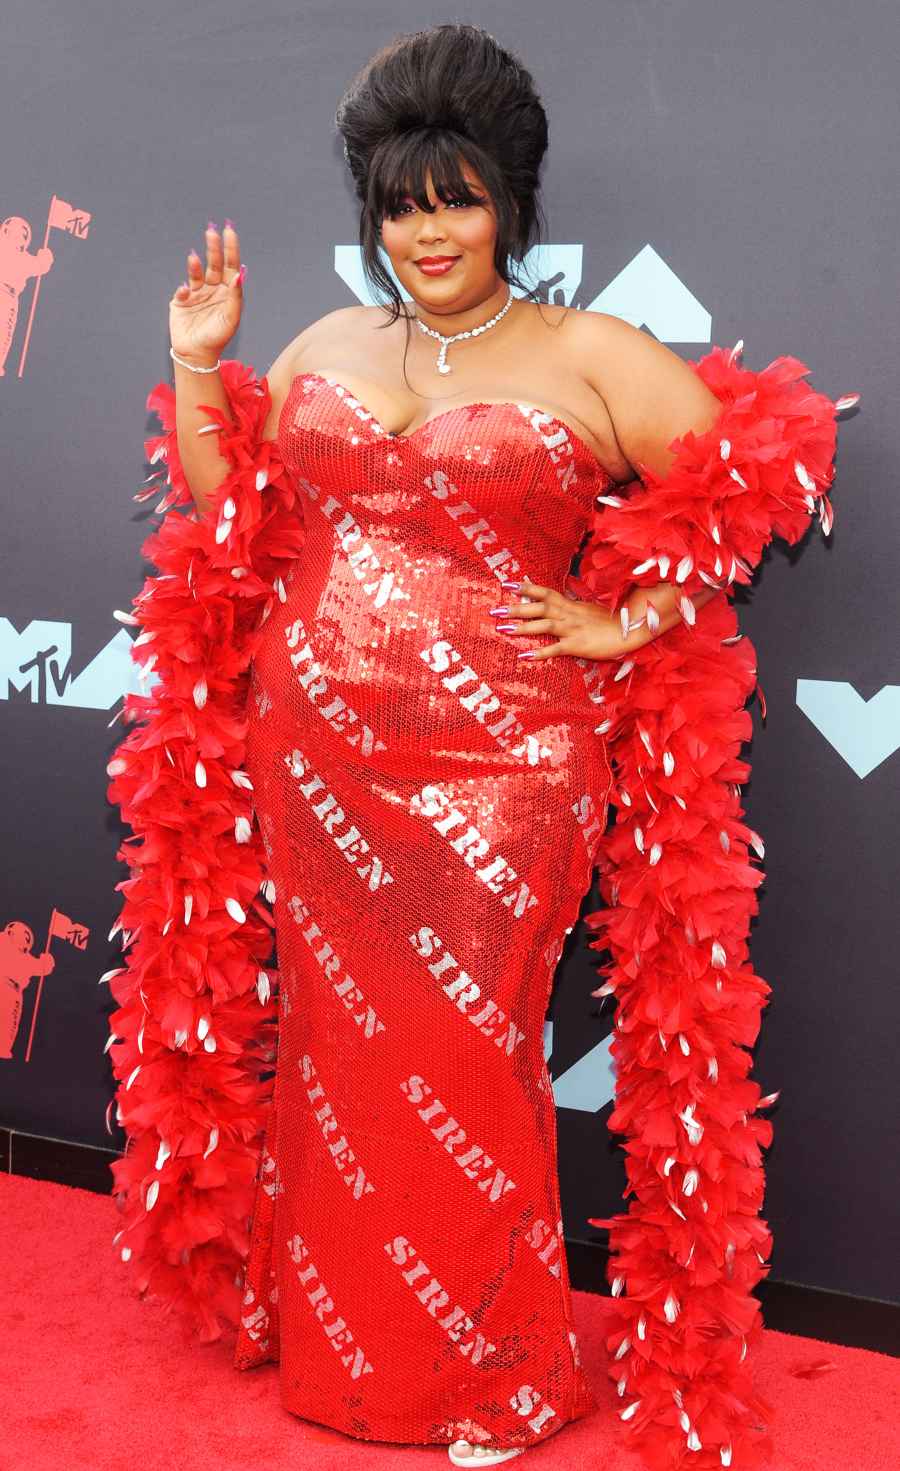 Most Influencial Dressers 2019 - Lizzo